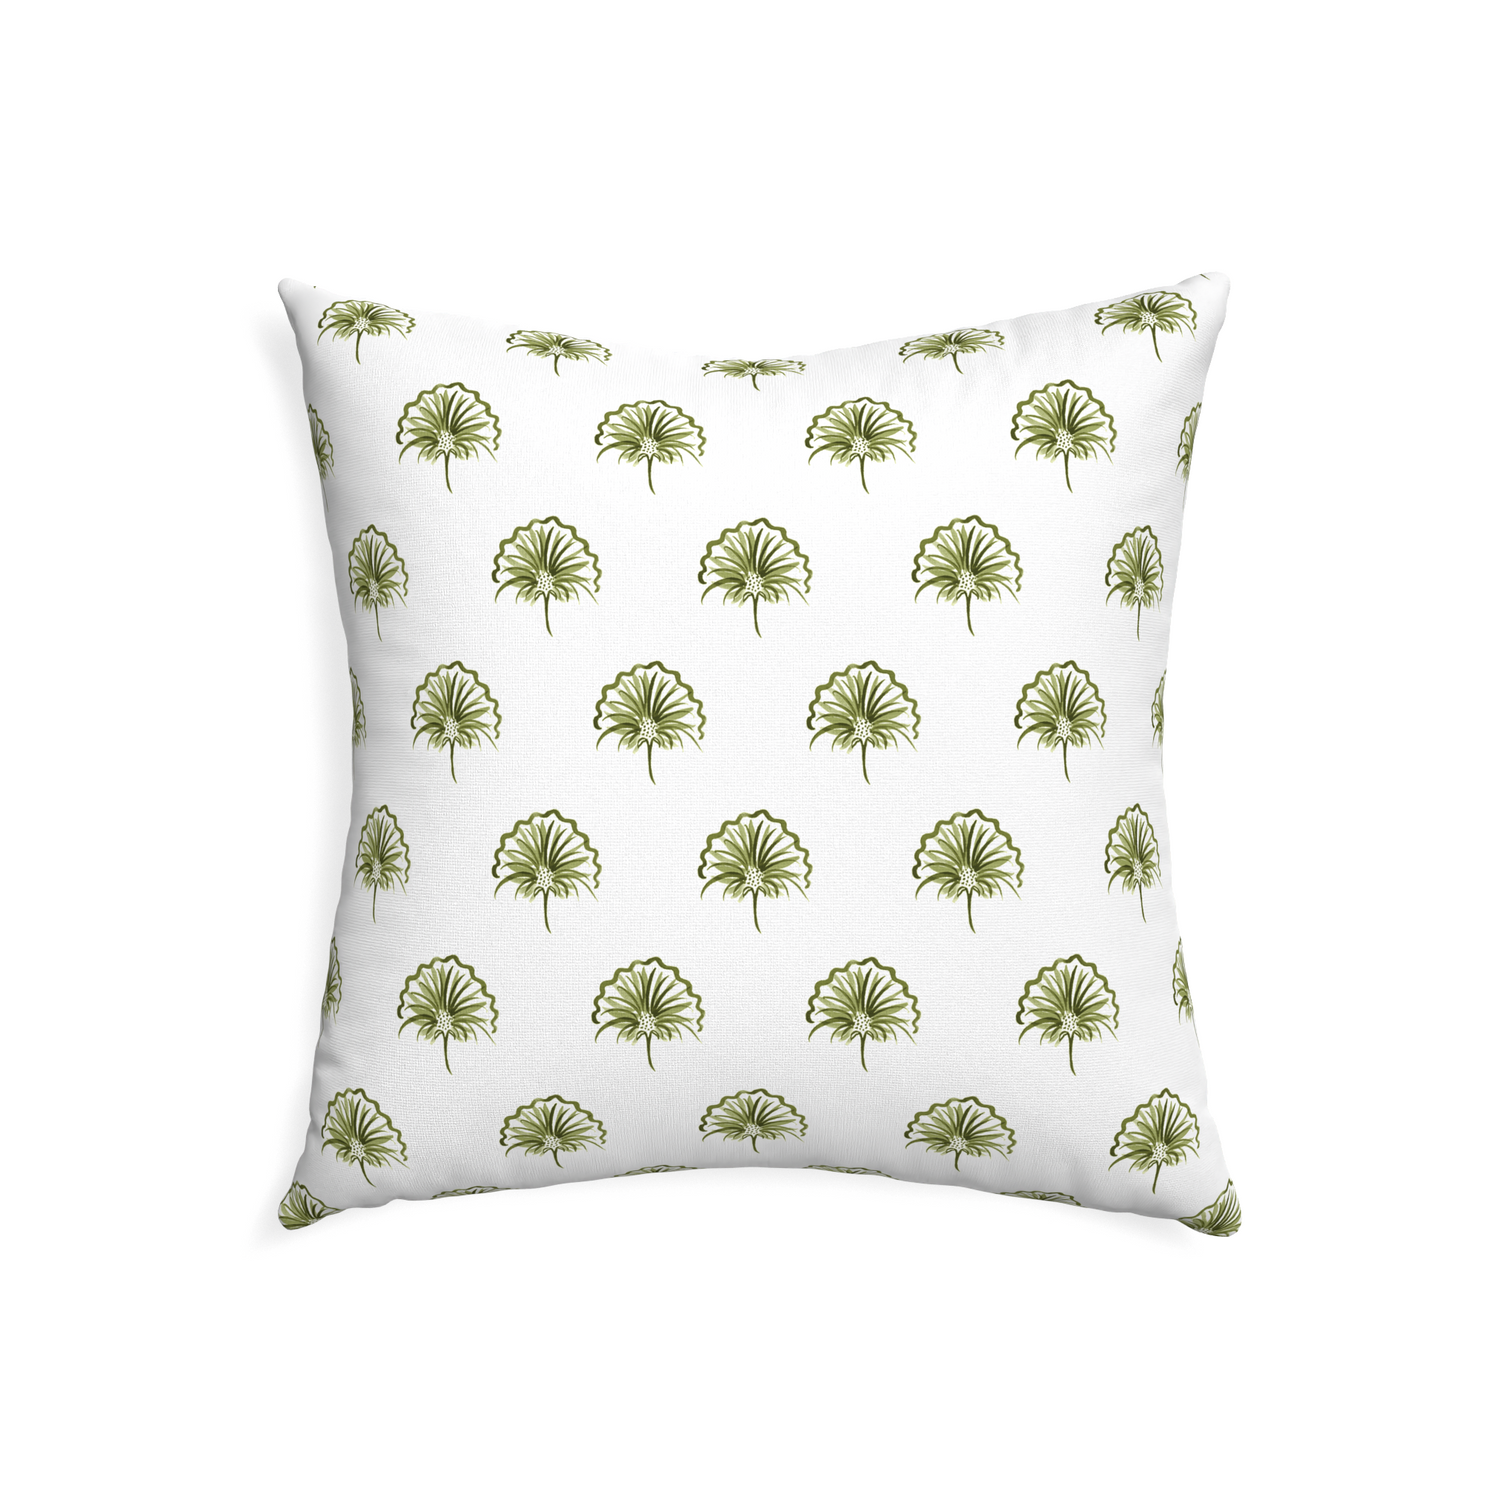 22-square penelope moss custom pillow with none on white background